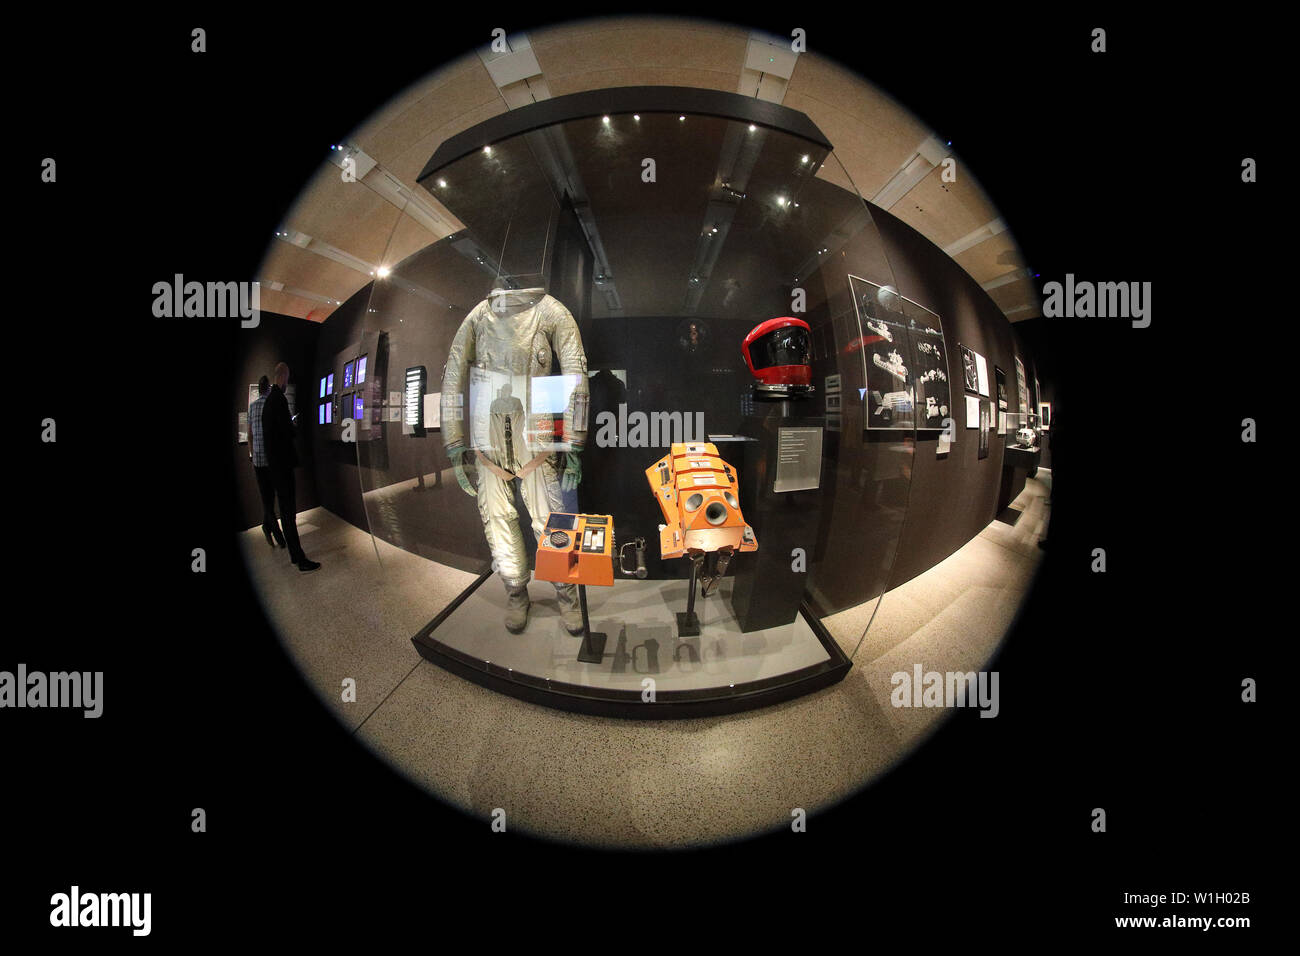 Space suit from the film '2001: A Space Odyssey' on display at the Stanley Kubrick exhibition, Design Museum, London. Shot through a fish-eye lens. Stock Photo